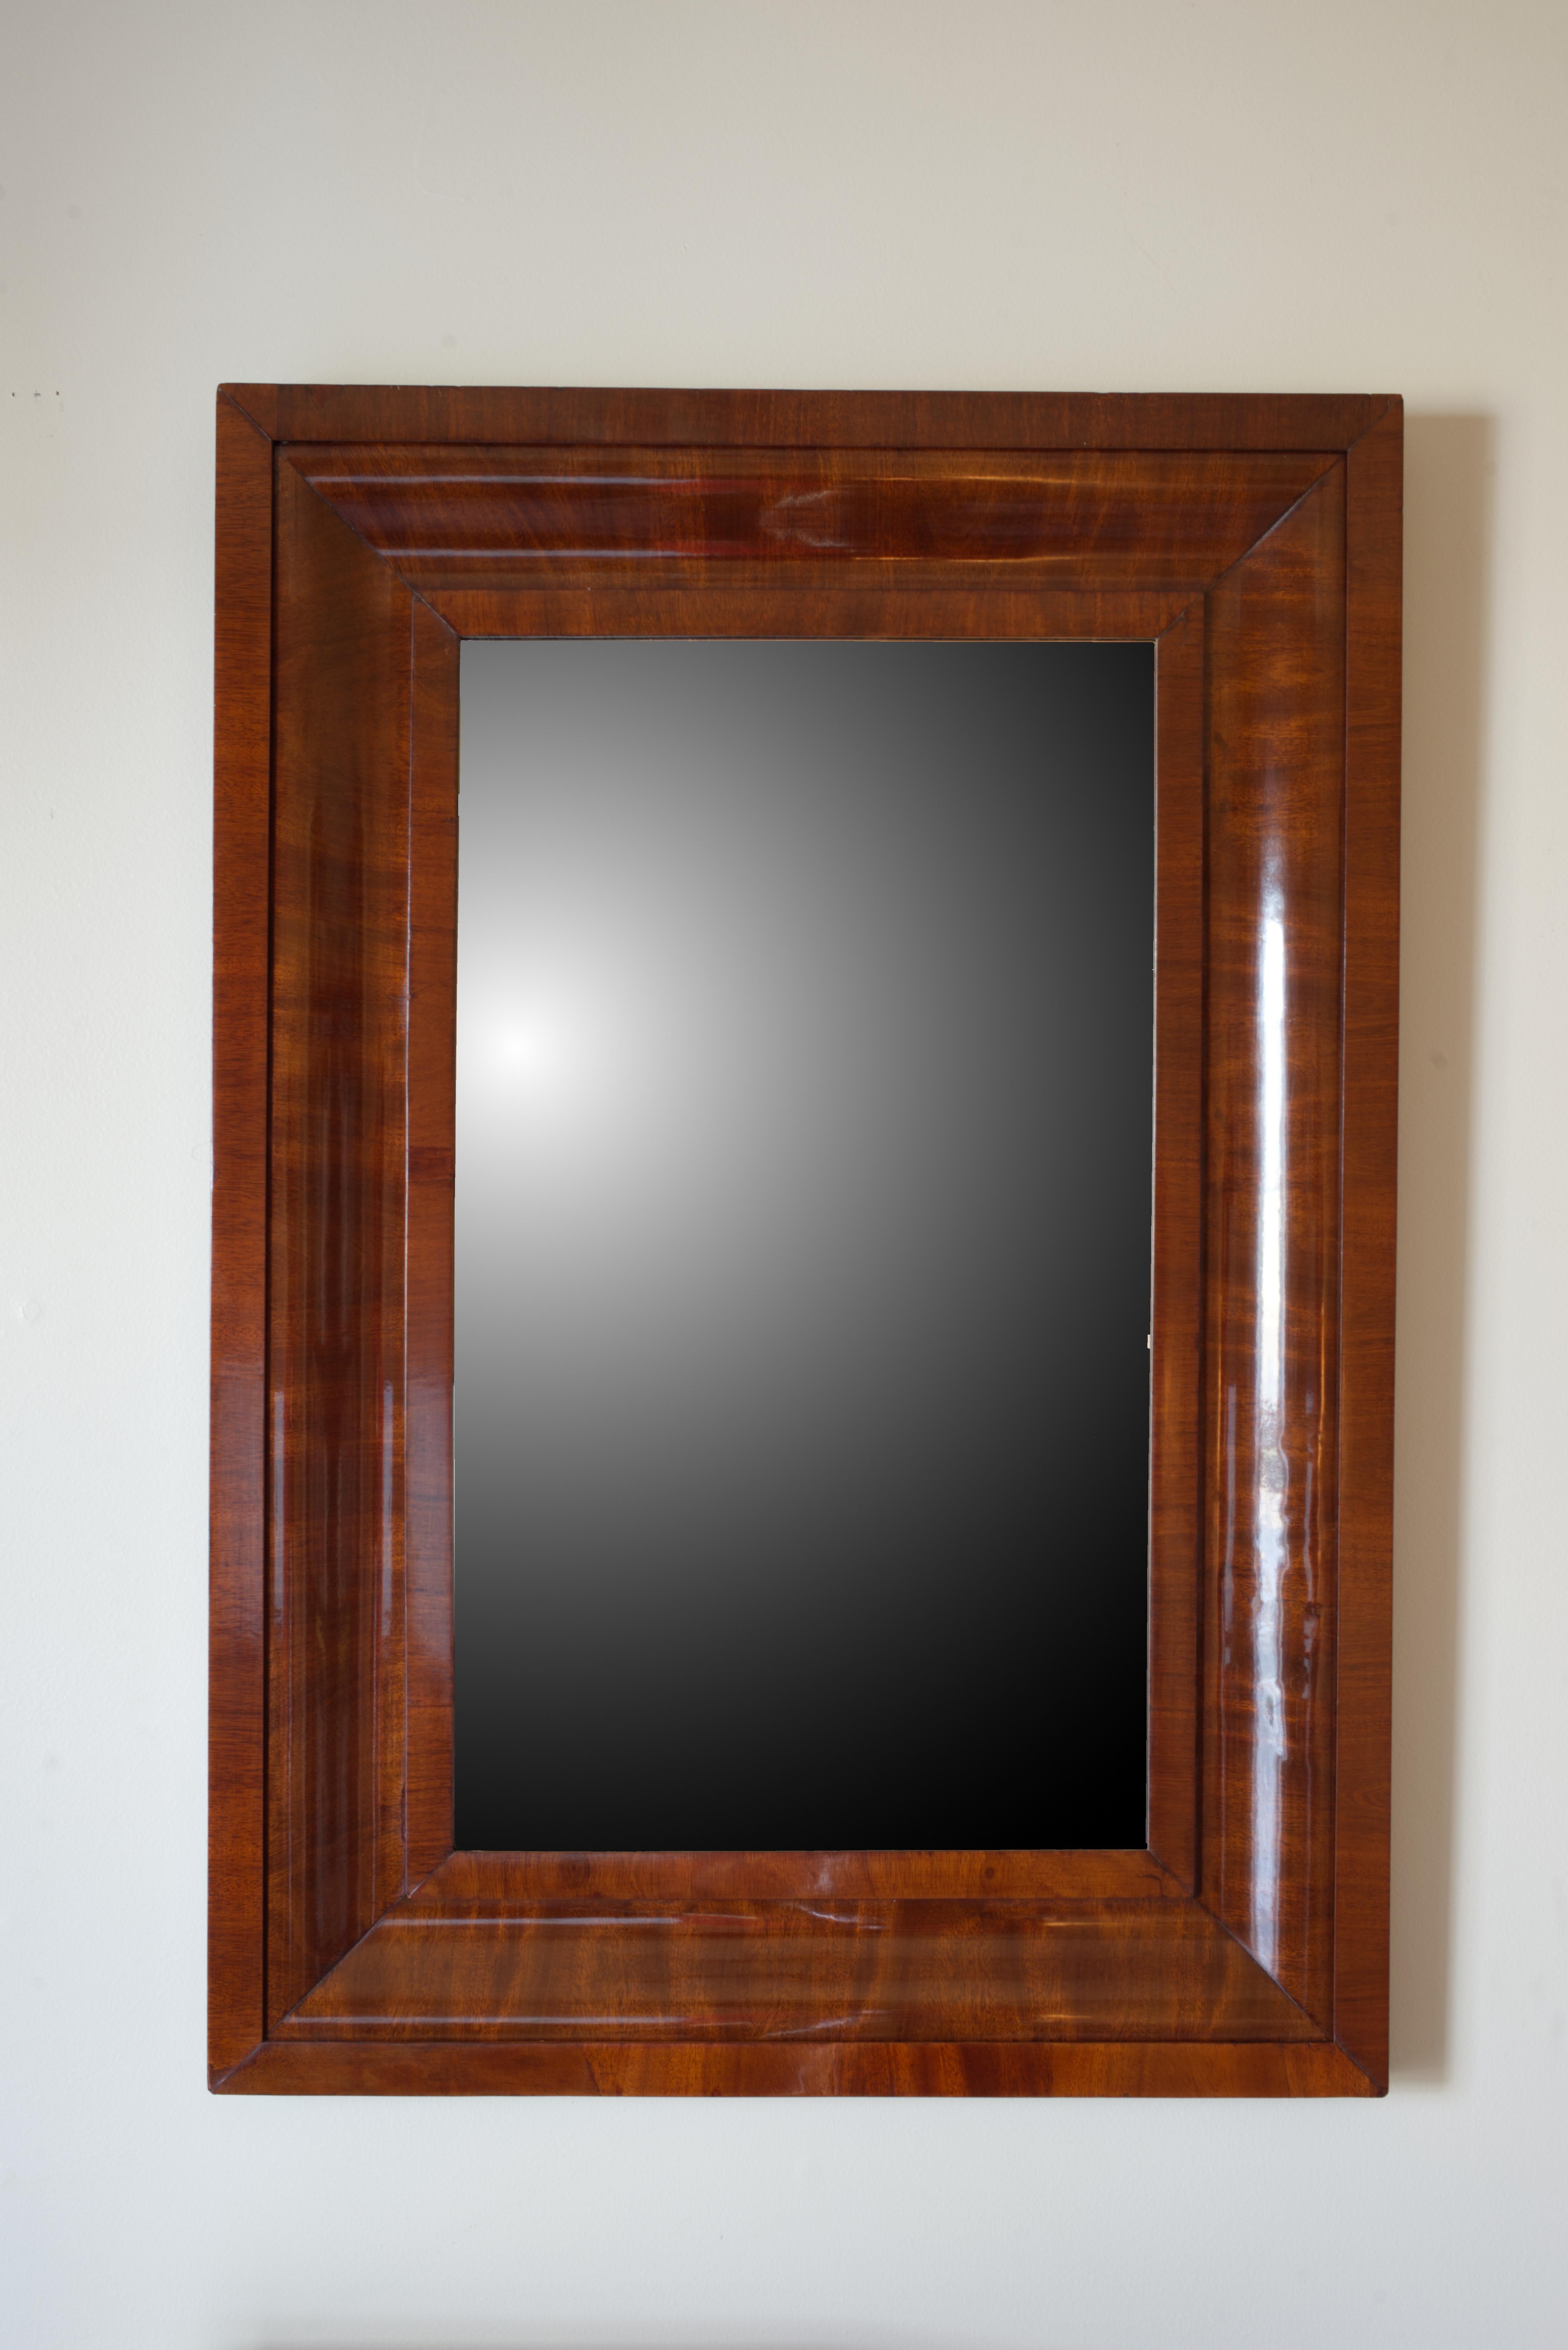 Lovely Mahogany veneered mirror frame. Mahogany (likely Cuban variety as the grain is incredibly tight and vibrant) is overlaid on profiled spruce frame. Construction and veneer layout are consistent with Mid 19th century NY and Pennsylvanian 